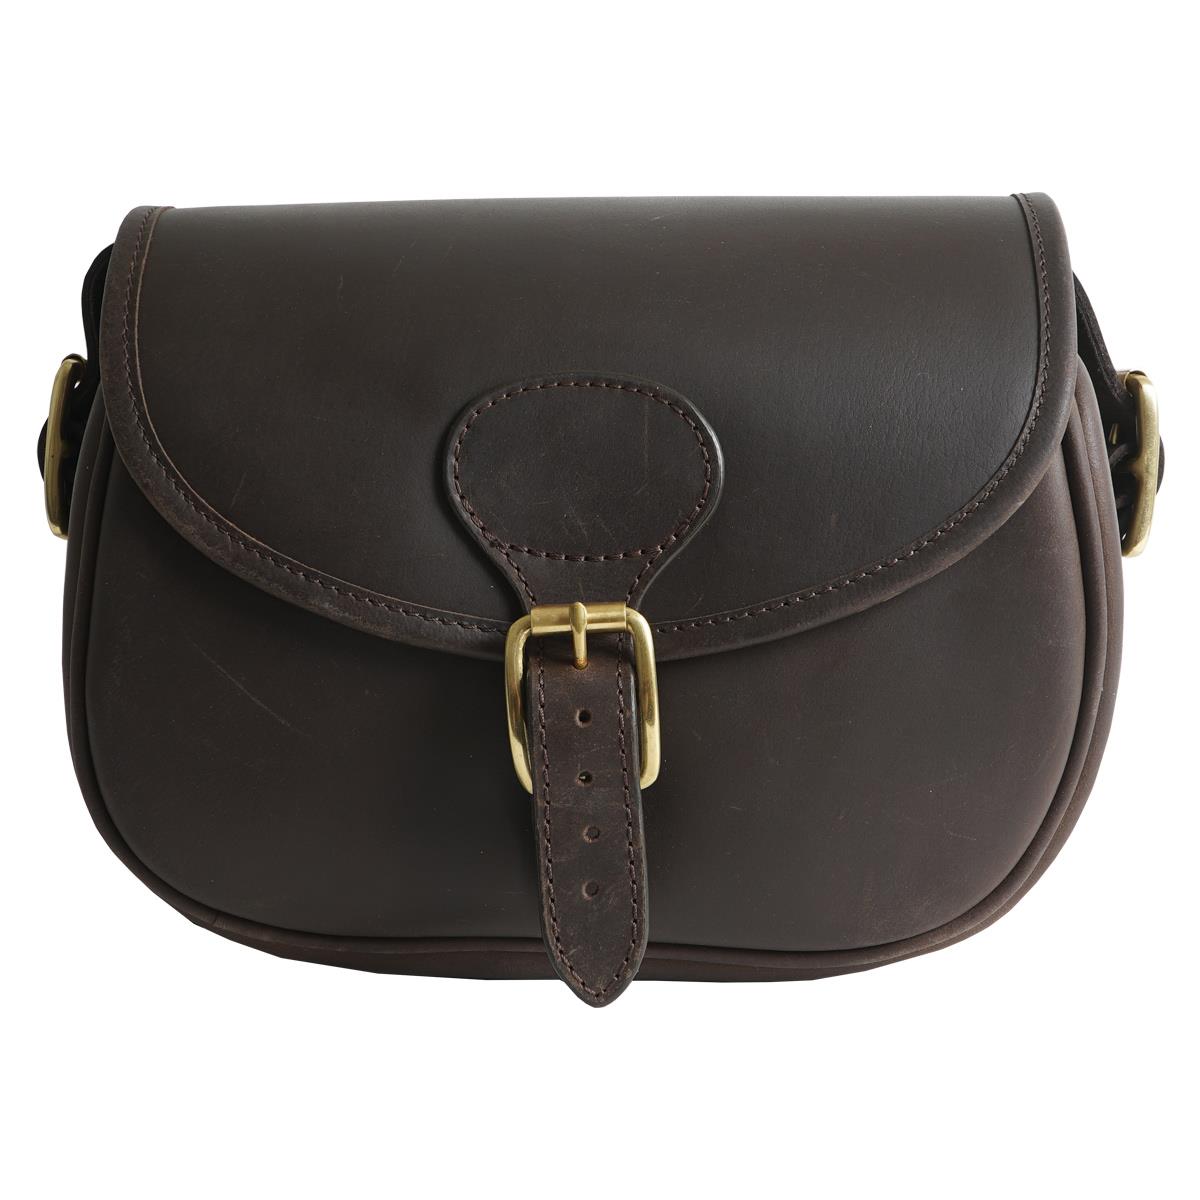 Teales Devonshire Leather Cartridge Bag Questions & Answers